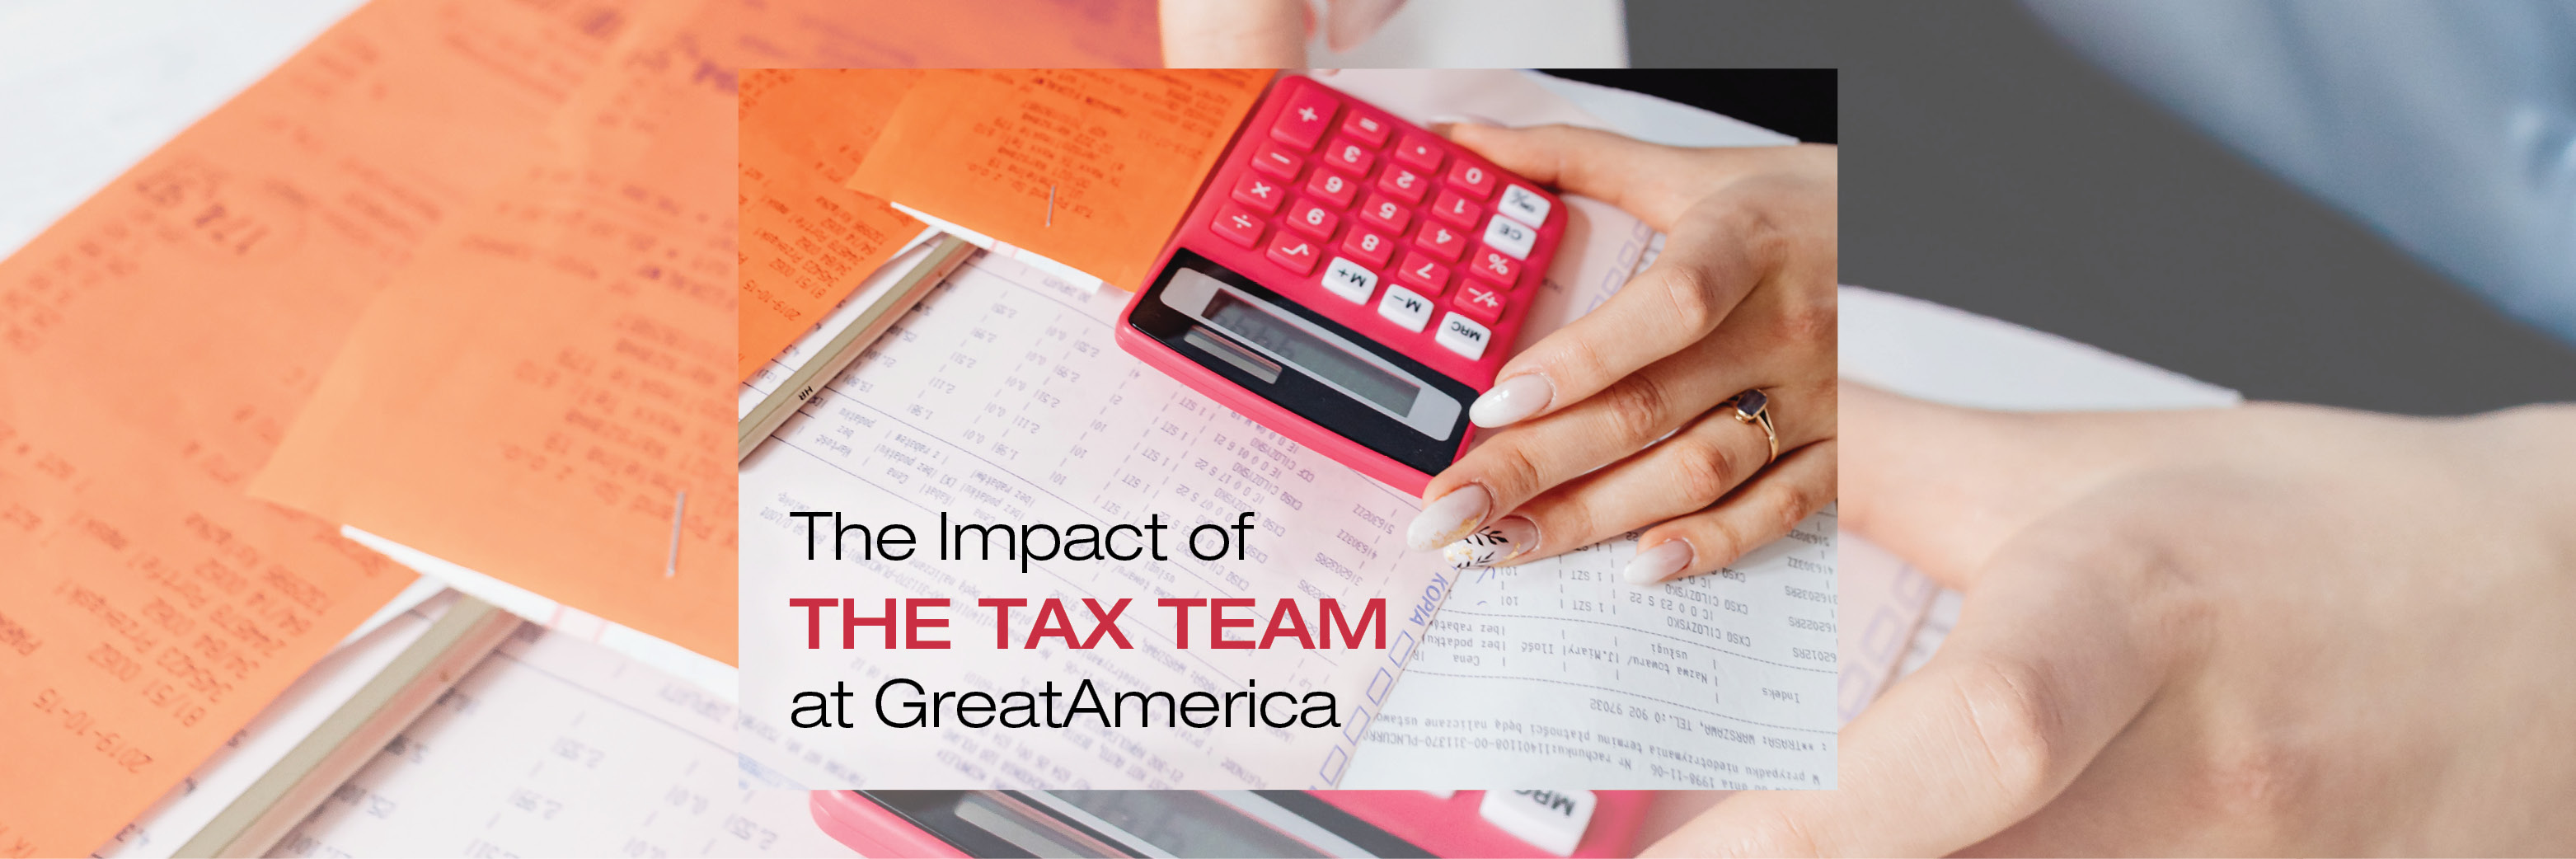 The Impact of the Tax Team at GreatAmerica